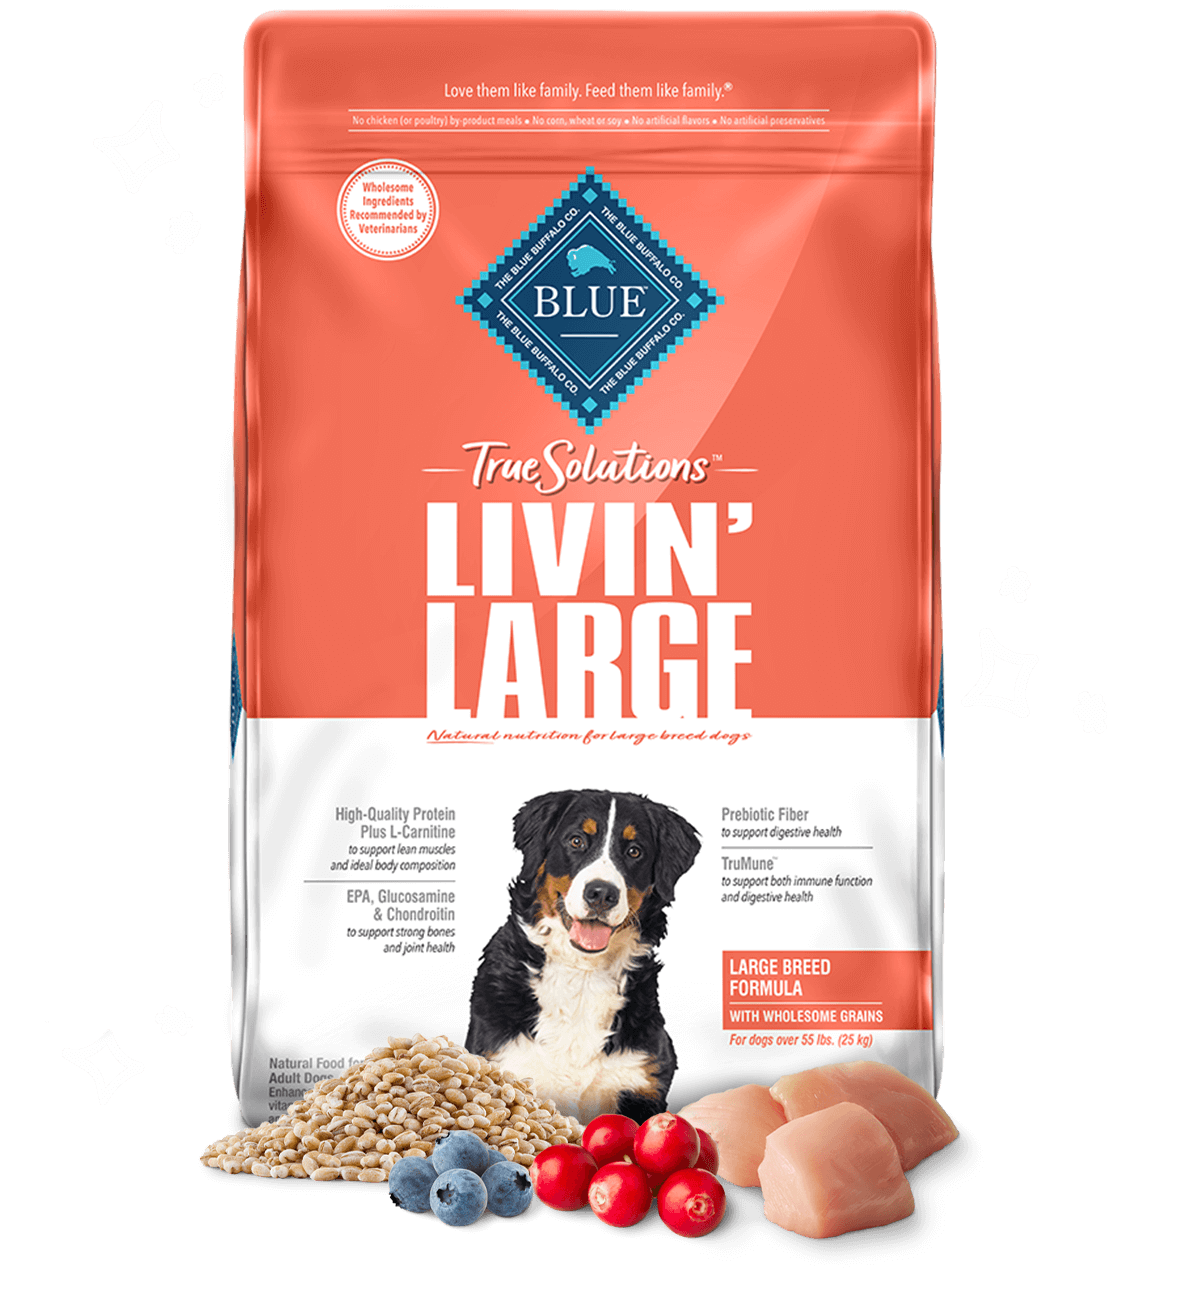 bag of True Solutions Livin Large dry dog food with ingredients